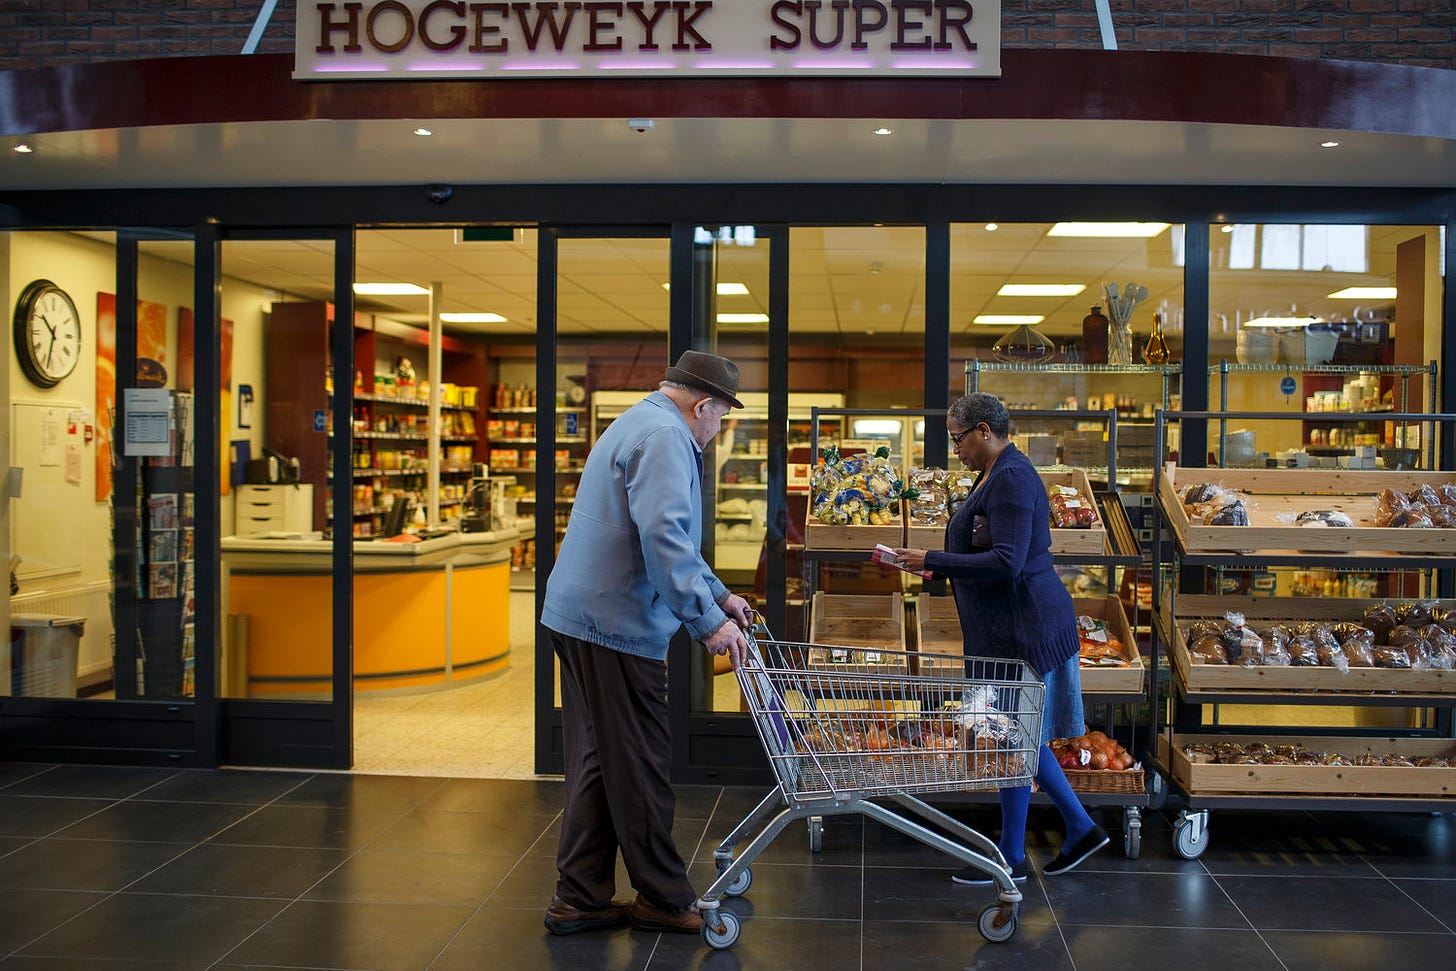 The exterior of the "Hogeweyk Super," the on-campus and operating grocery store, with shelves and register and carts in use.